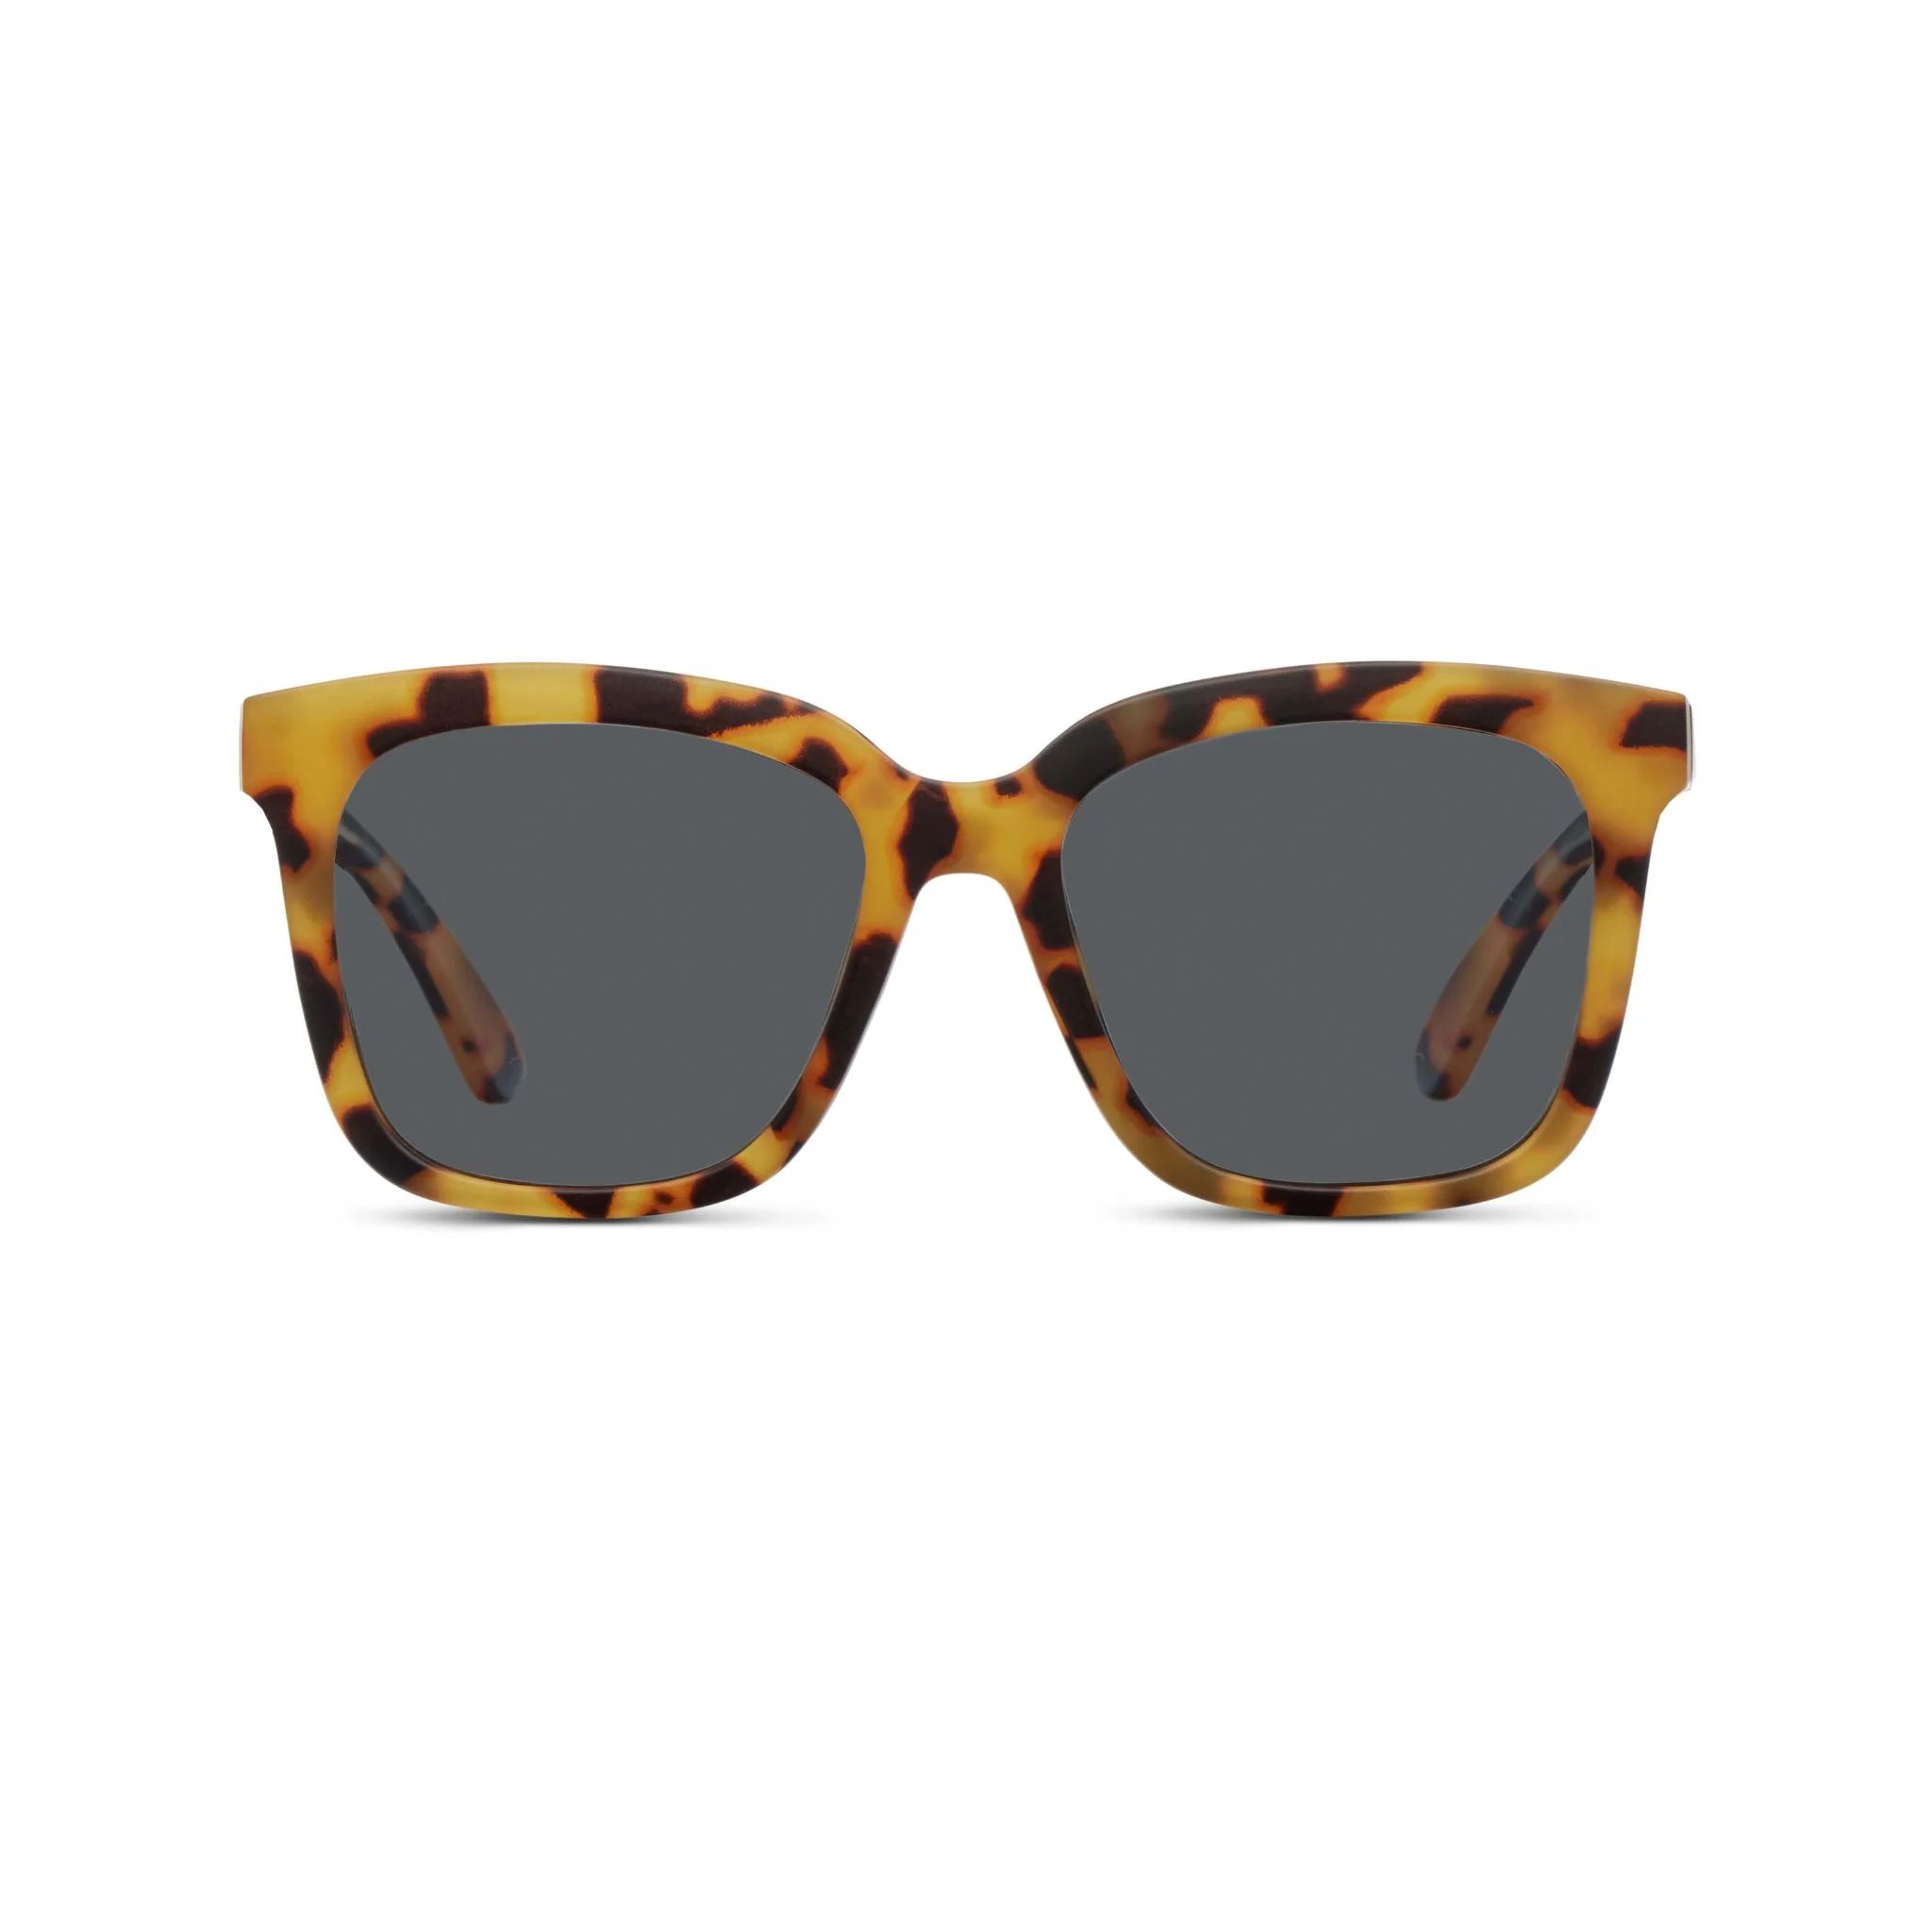 First Class (Sunglasses) - Tokyo Tortoise / Reading / 2.00 - Peepers by PeeperSpecs | Peepers